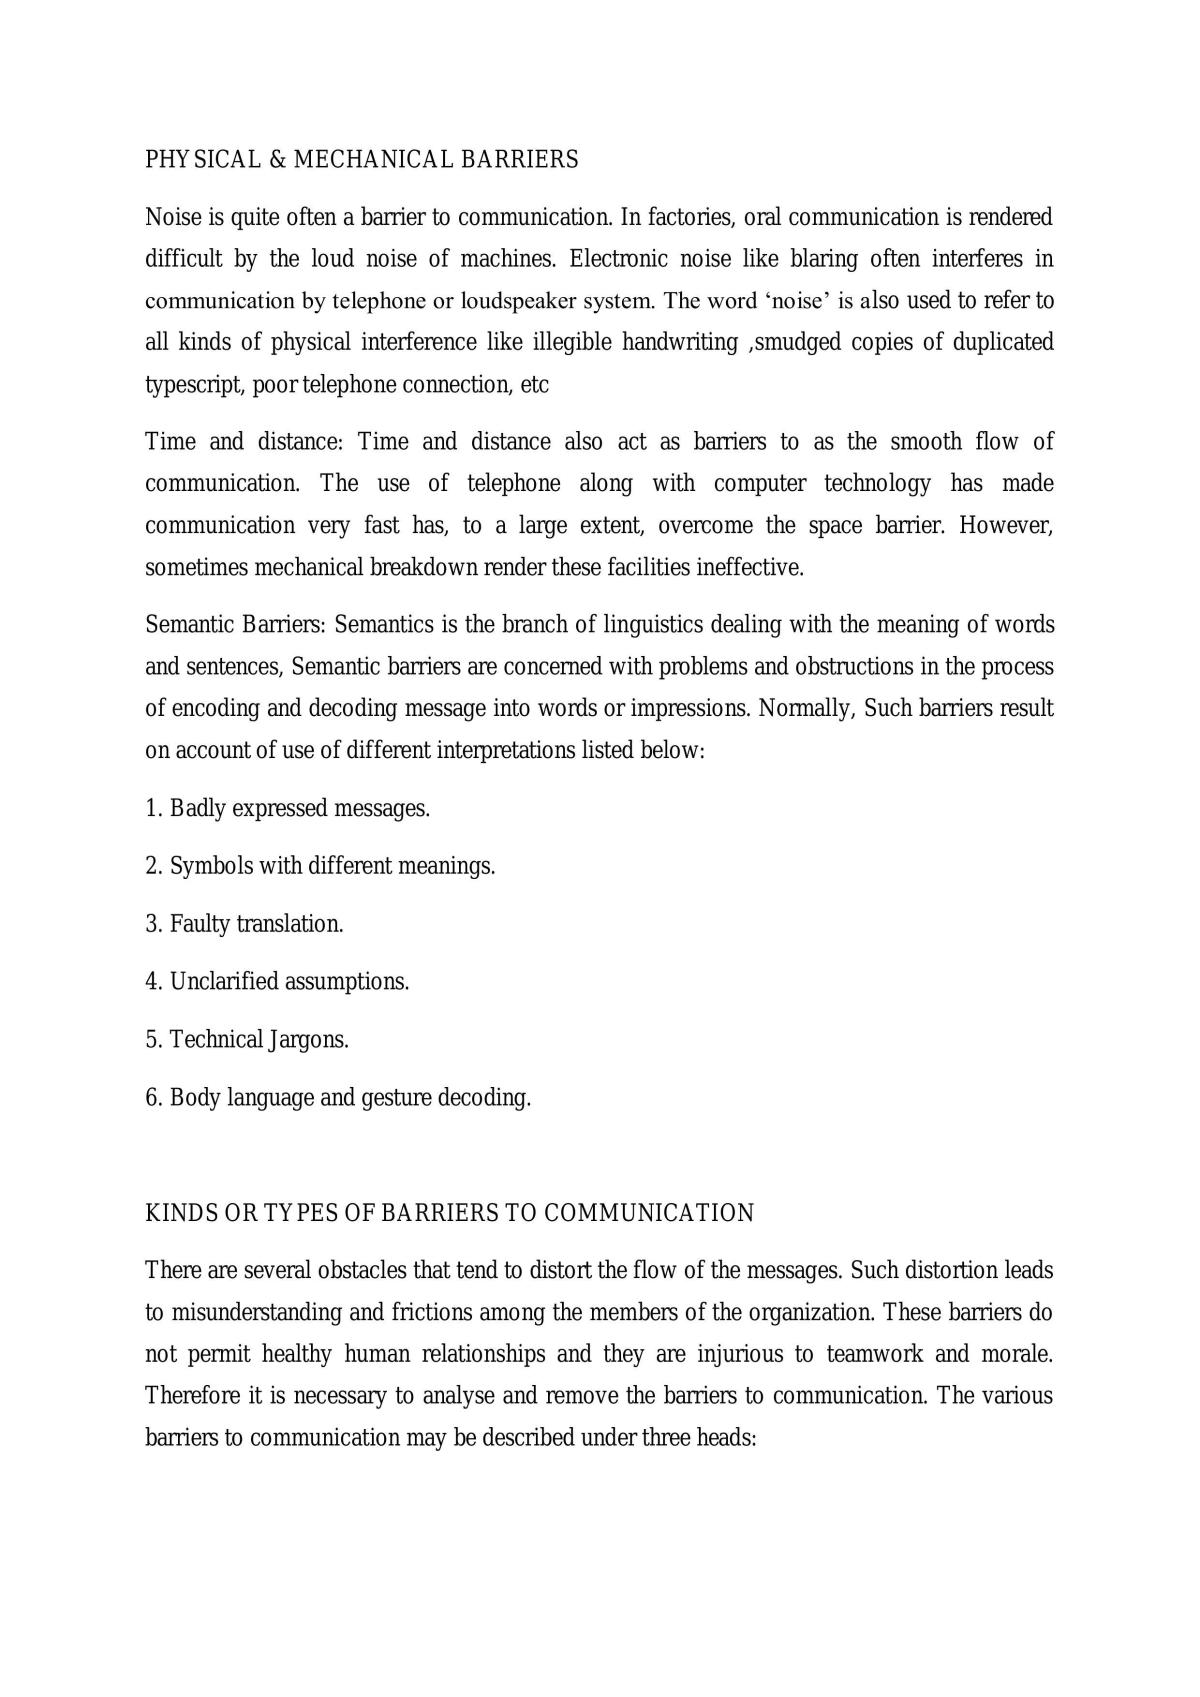 Corporate Communication Note - Page 18